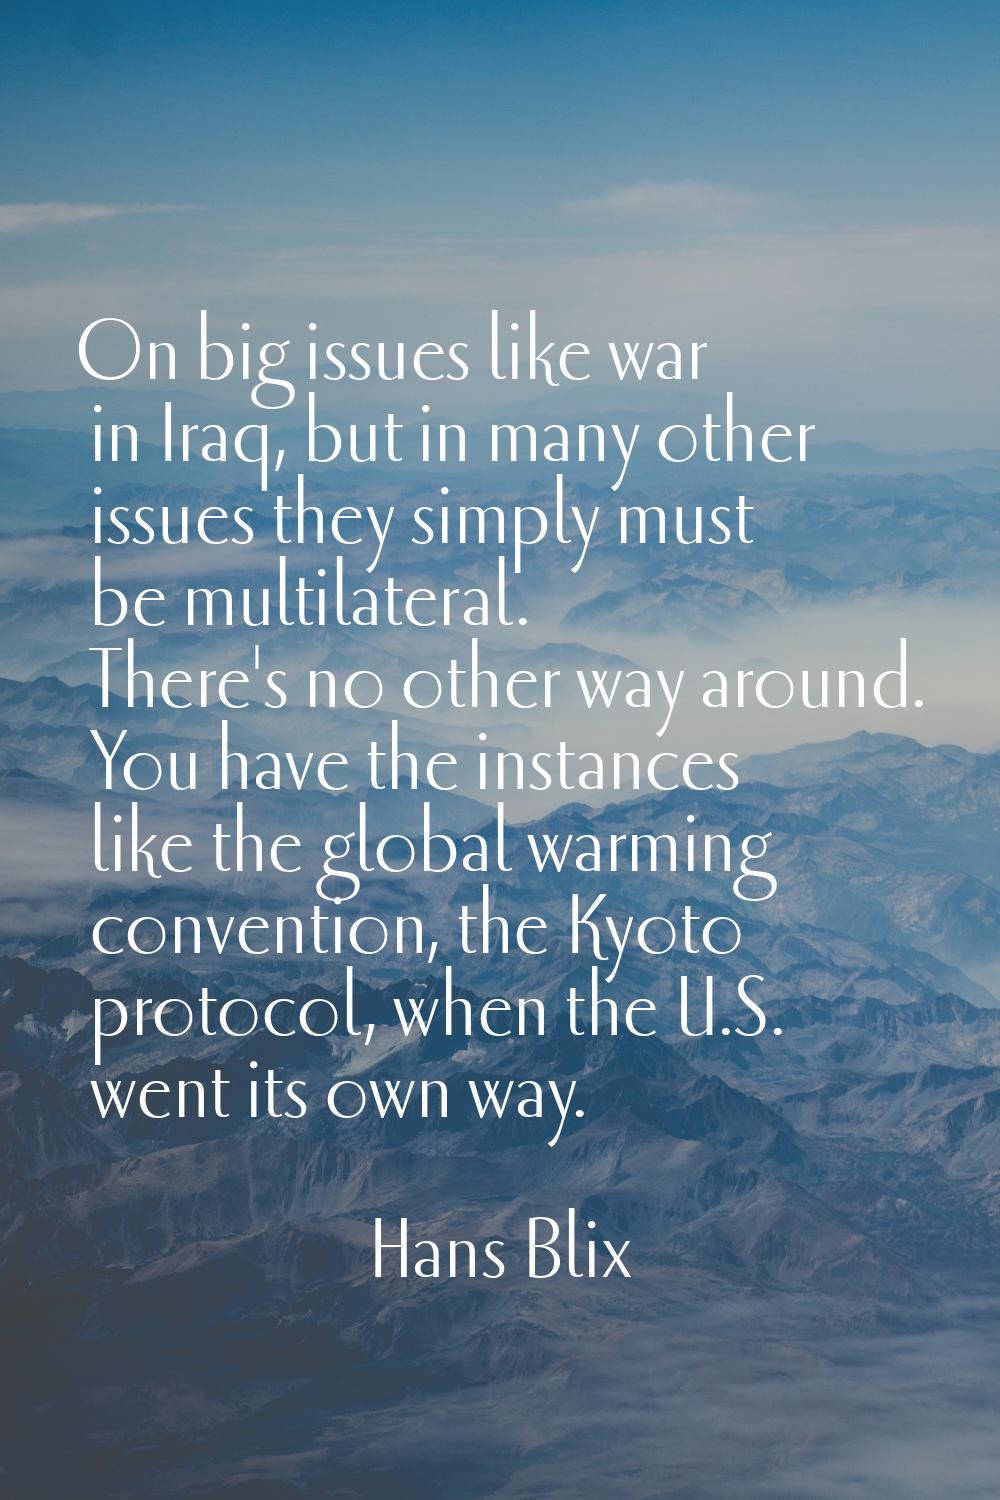 On big issues like war in Iraq, but in many other issues they simply must be multilateral. There's 